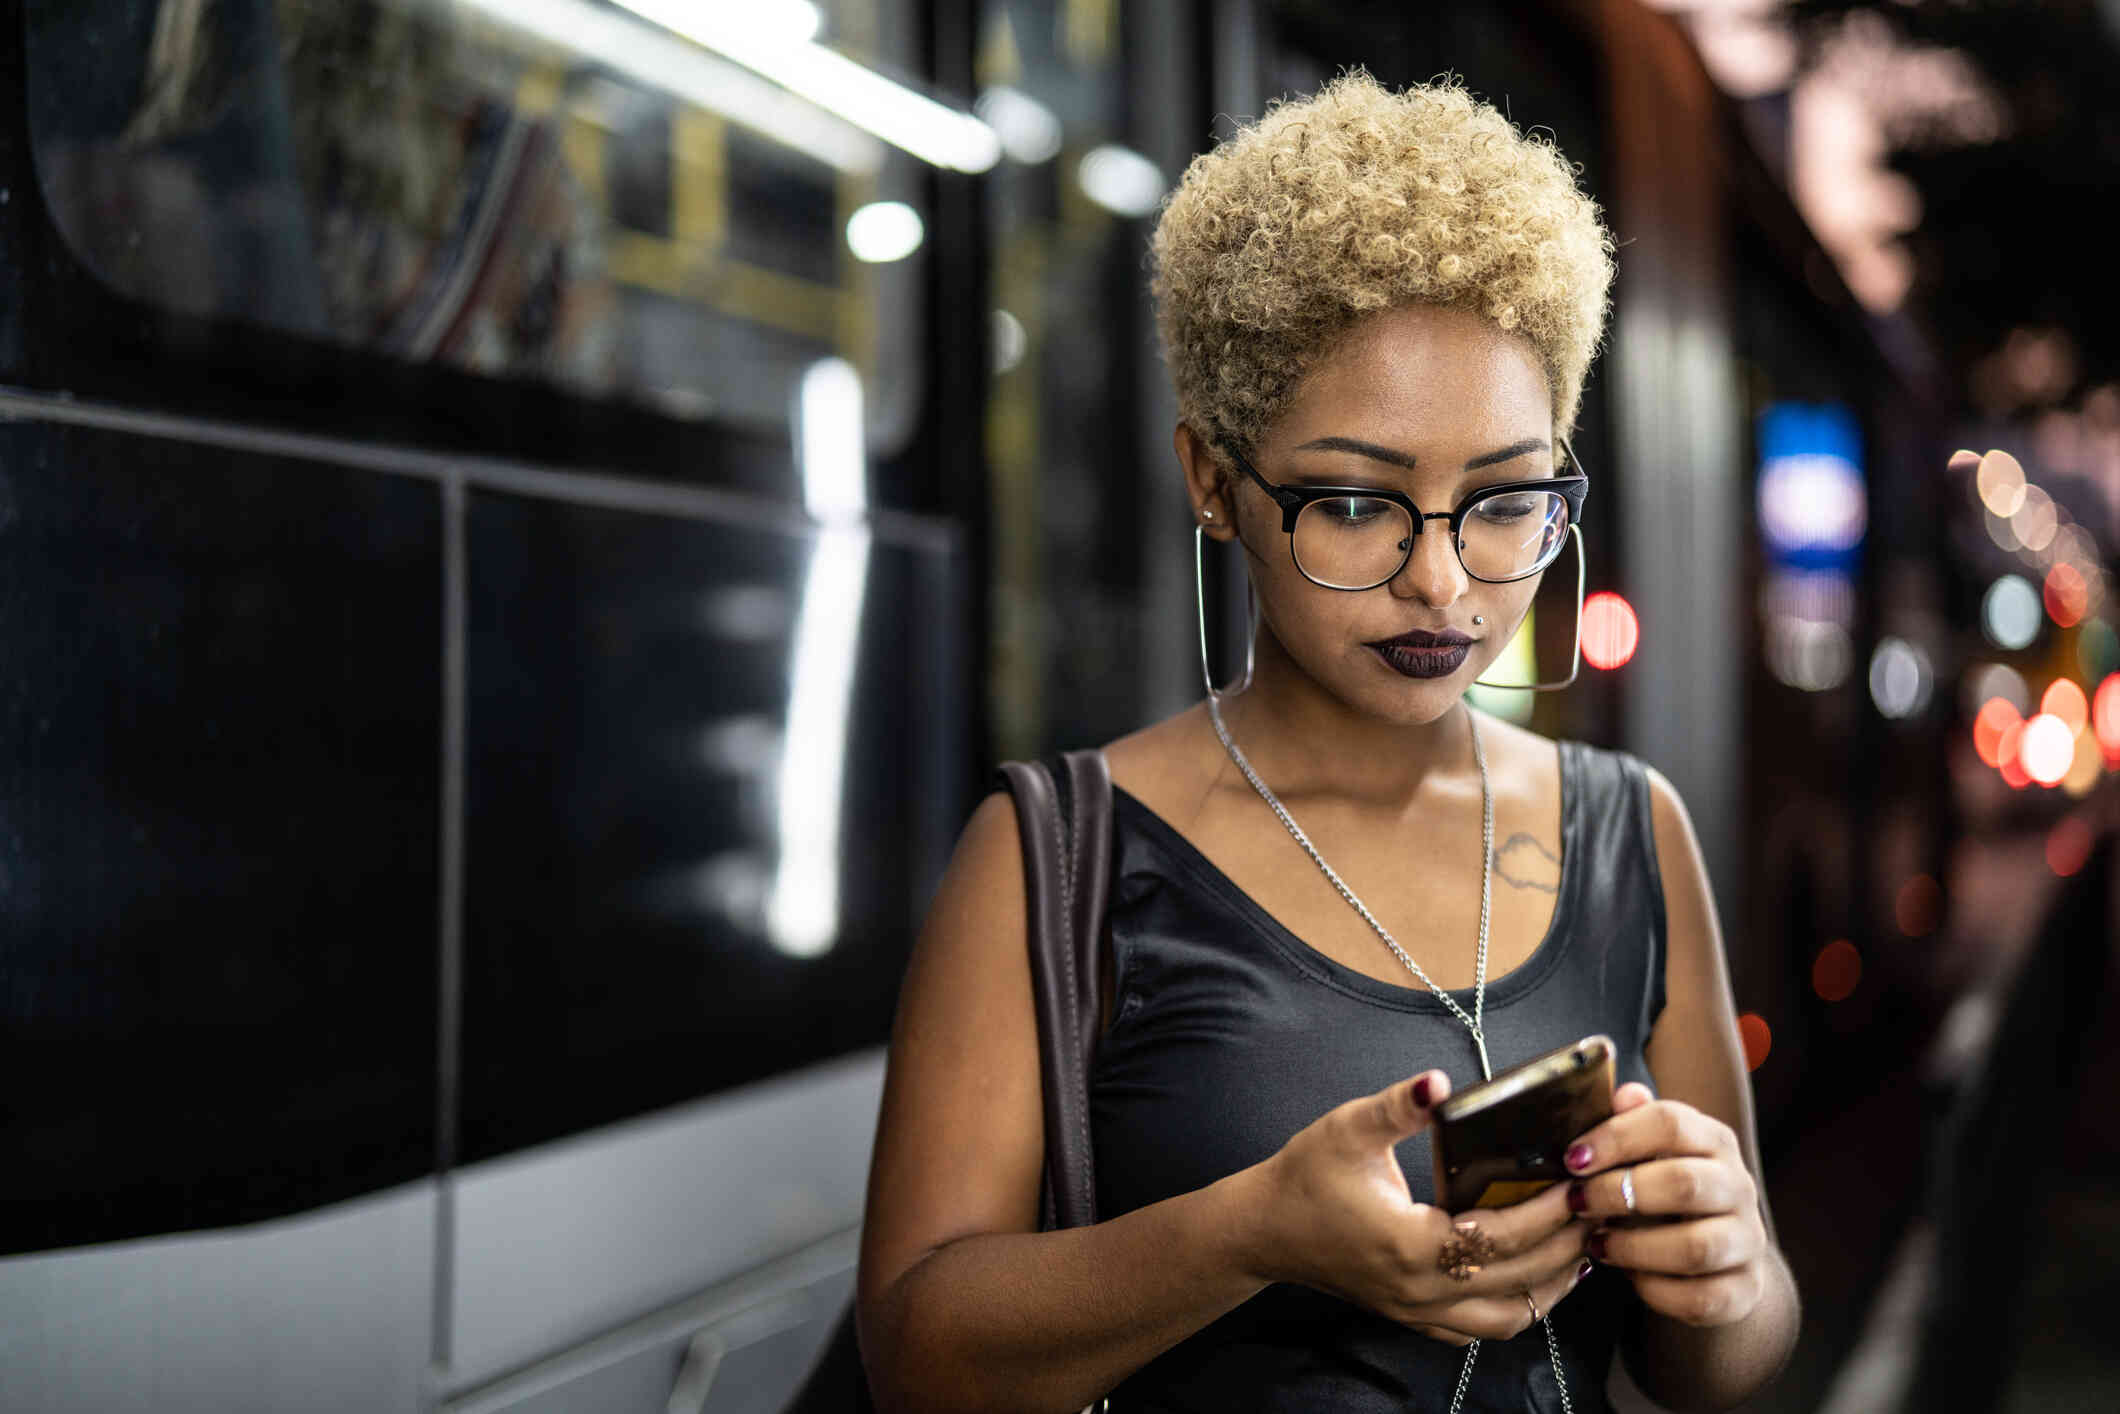 A woman with glasses in a black shirt stands in the subway and looks at the cellphone in her hand with a serious expression.